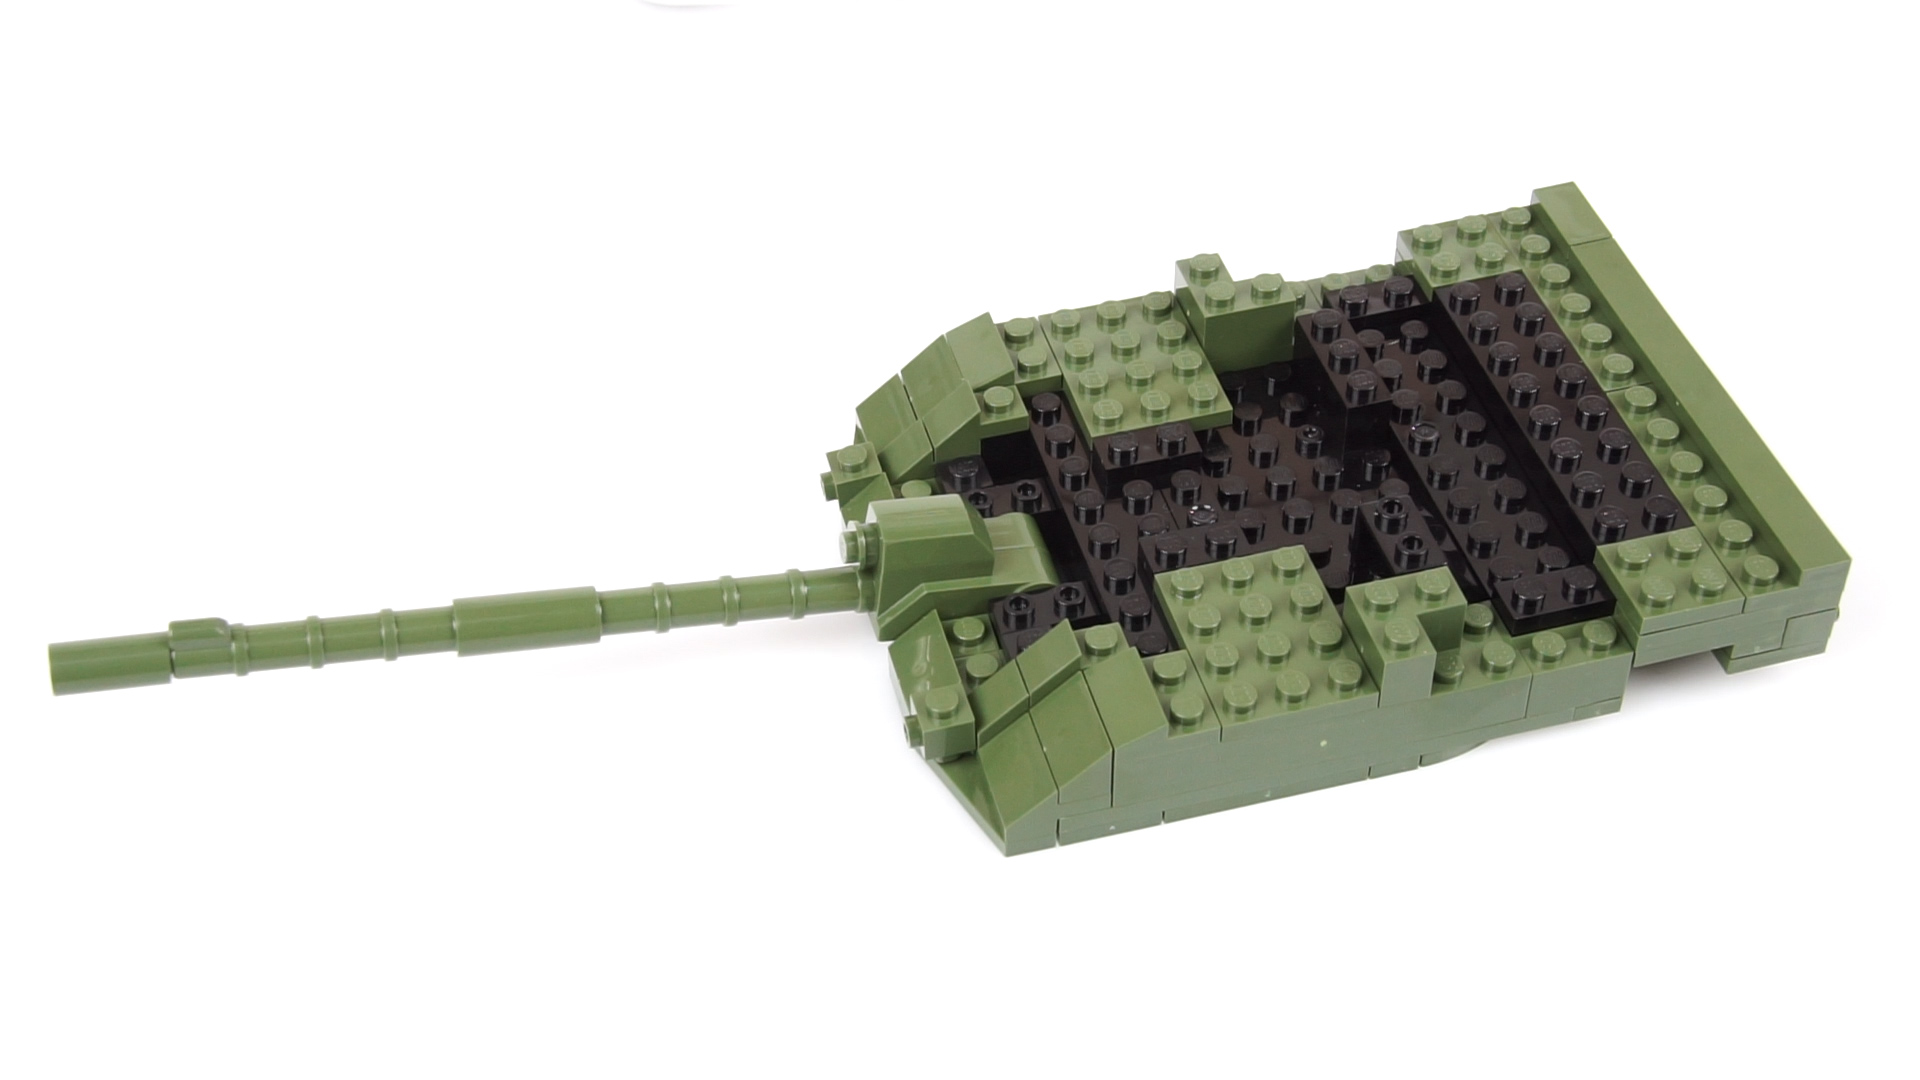 The gun from this turret is not built, but consists of 2 molded parts that ...